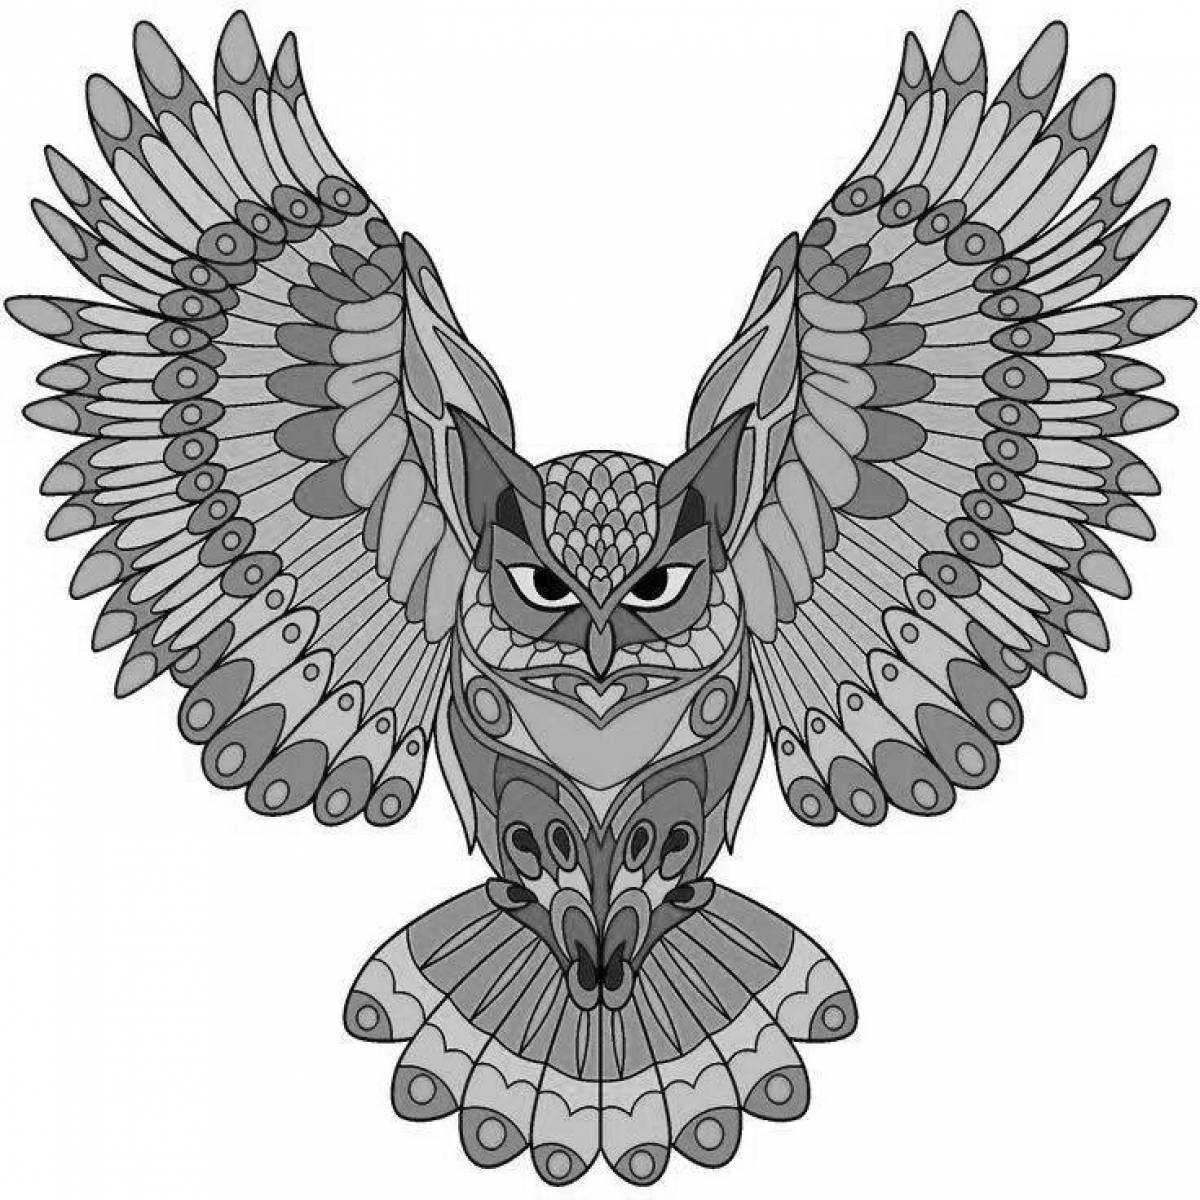 Charming owl coloring book